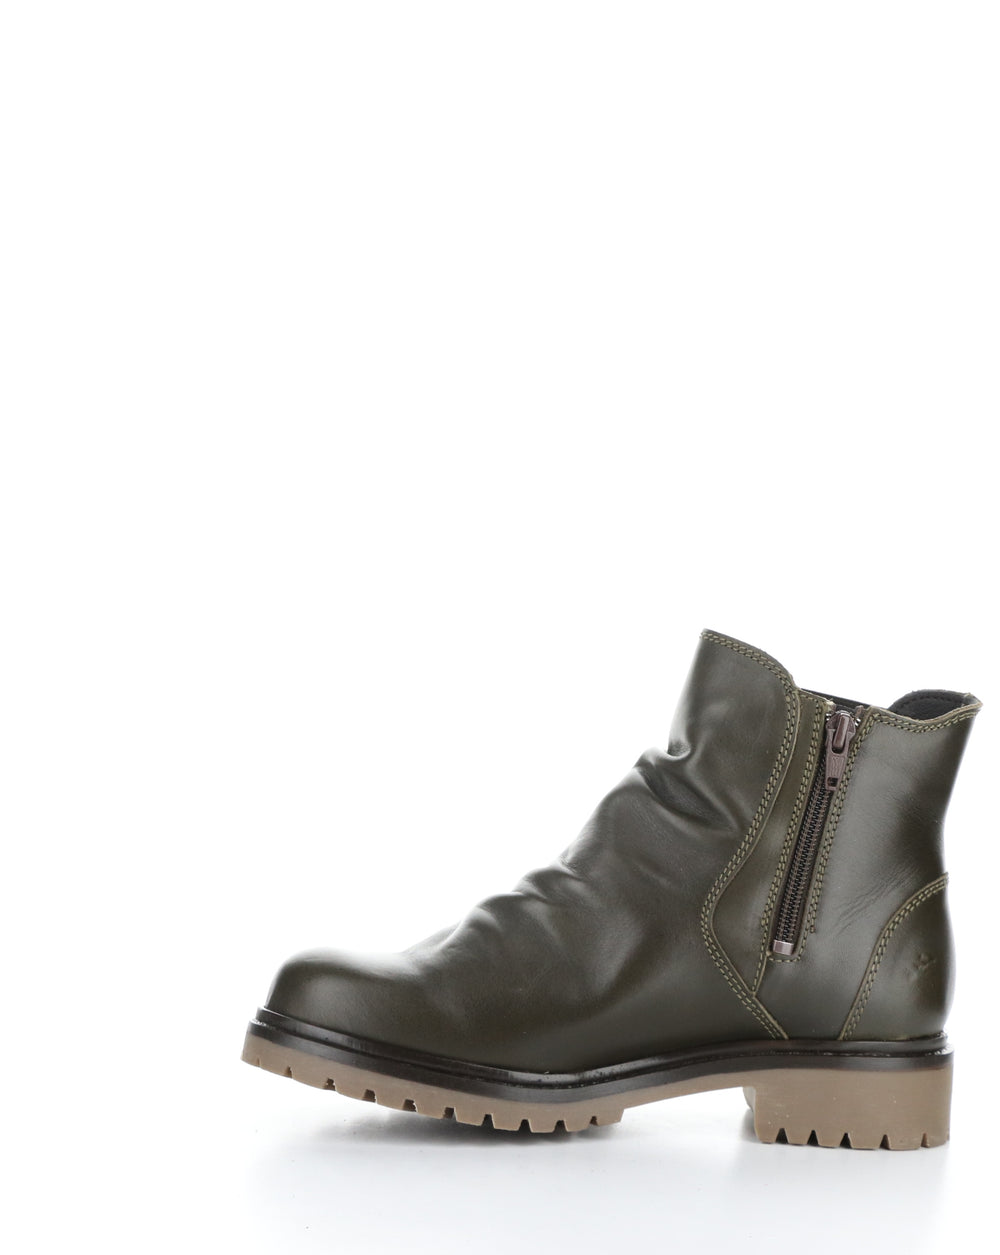 CECIL OLIVE Elasticated Boots